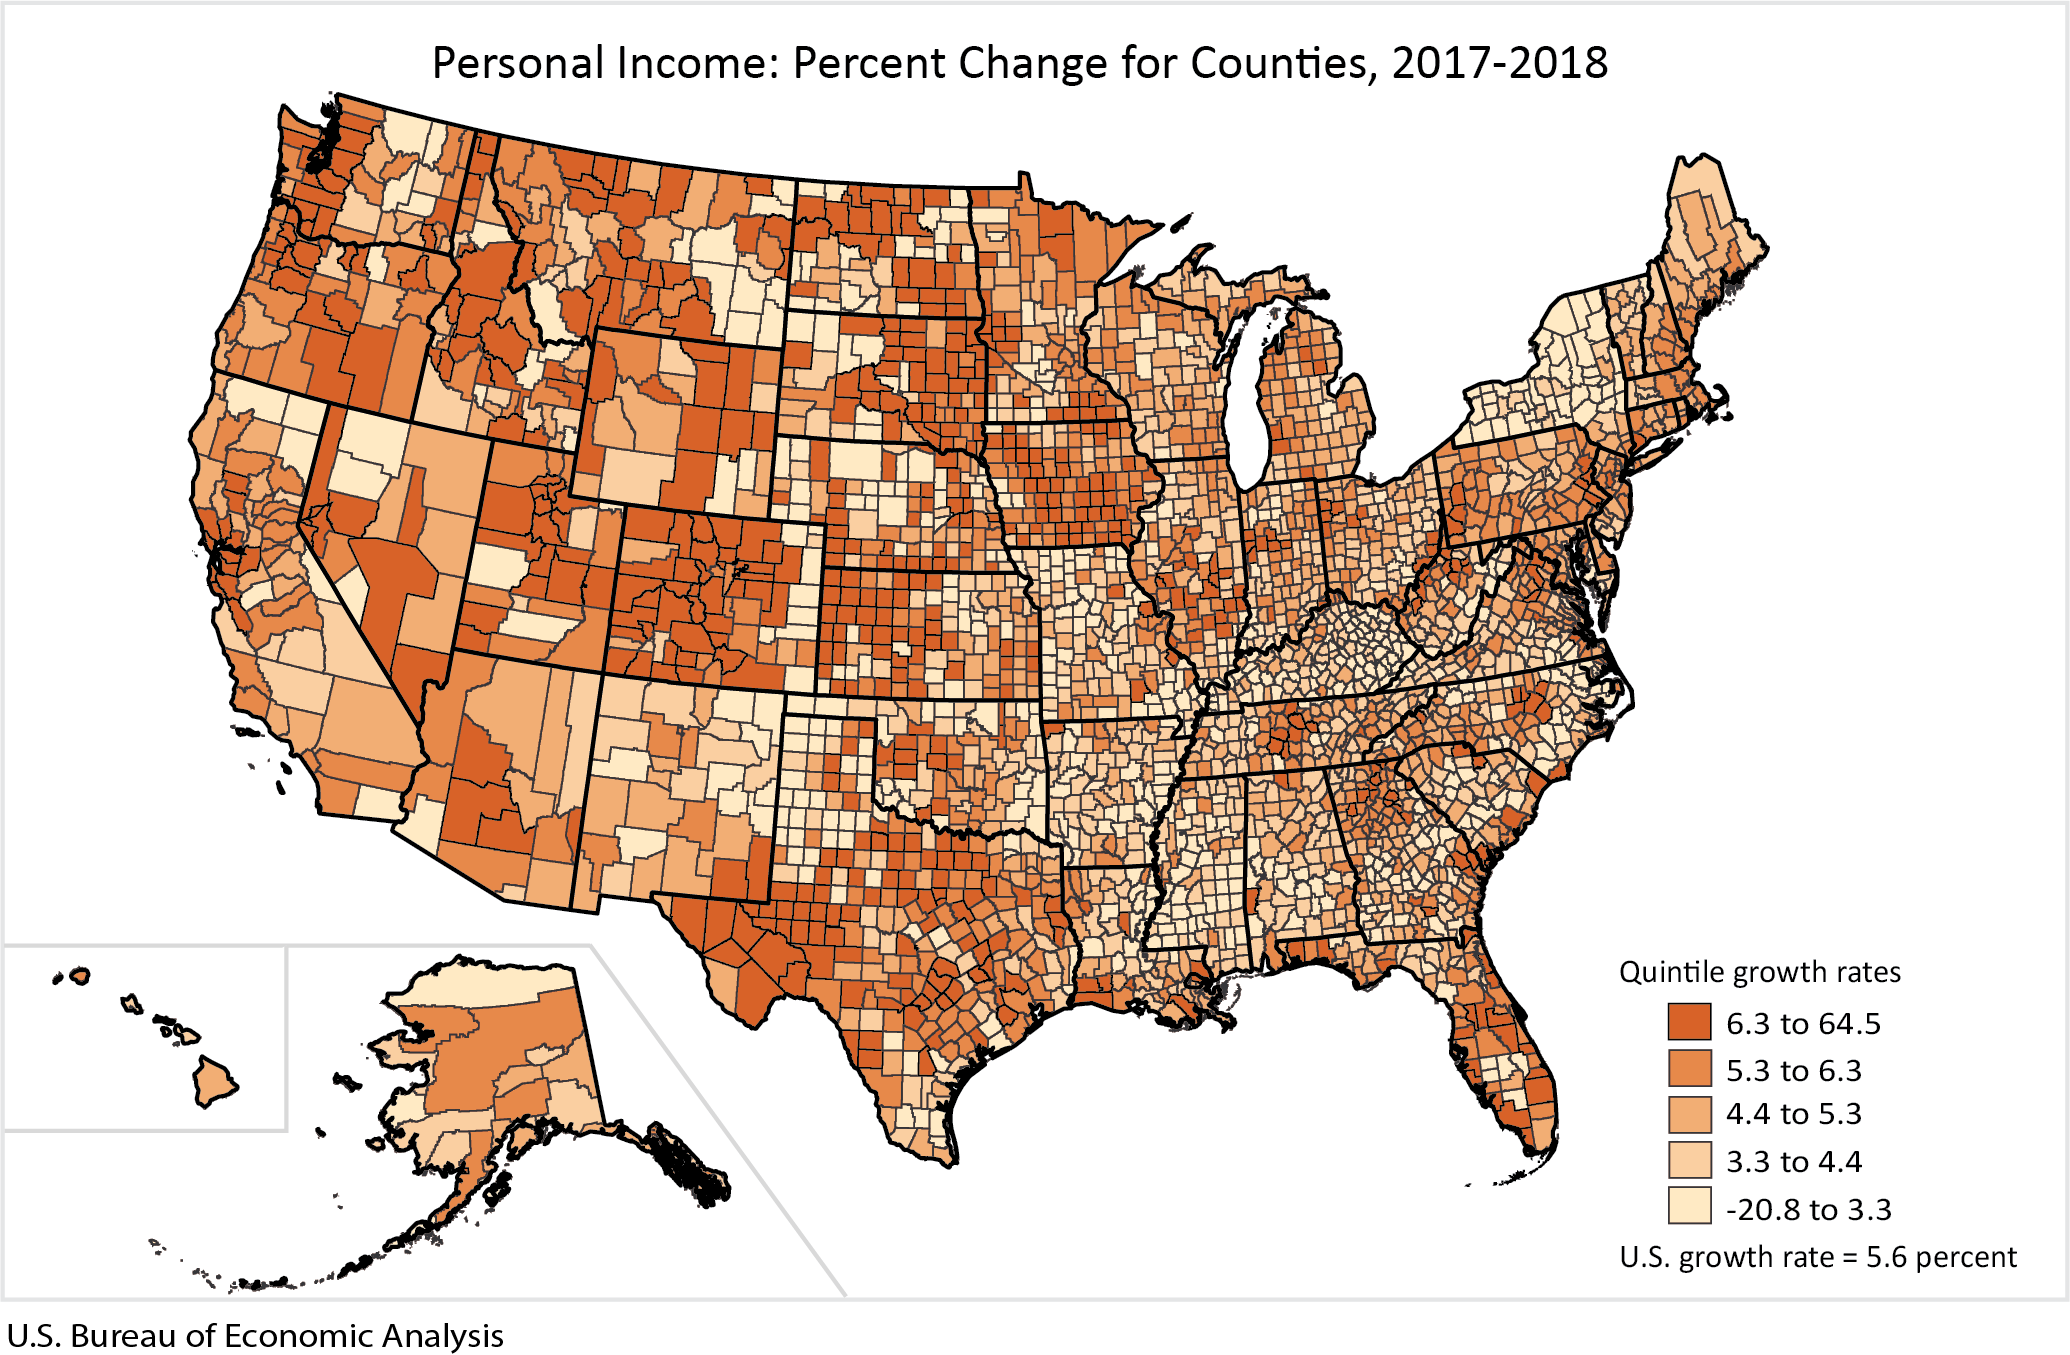 Personal Income: Percent Change for Counties, 2017-2018